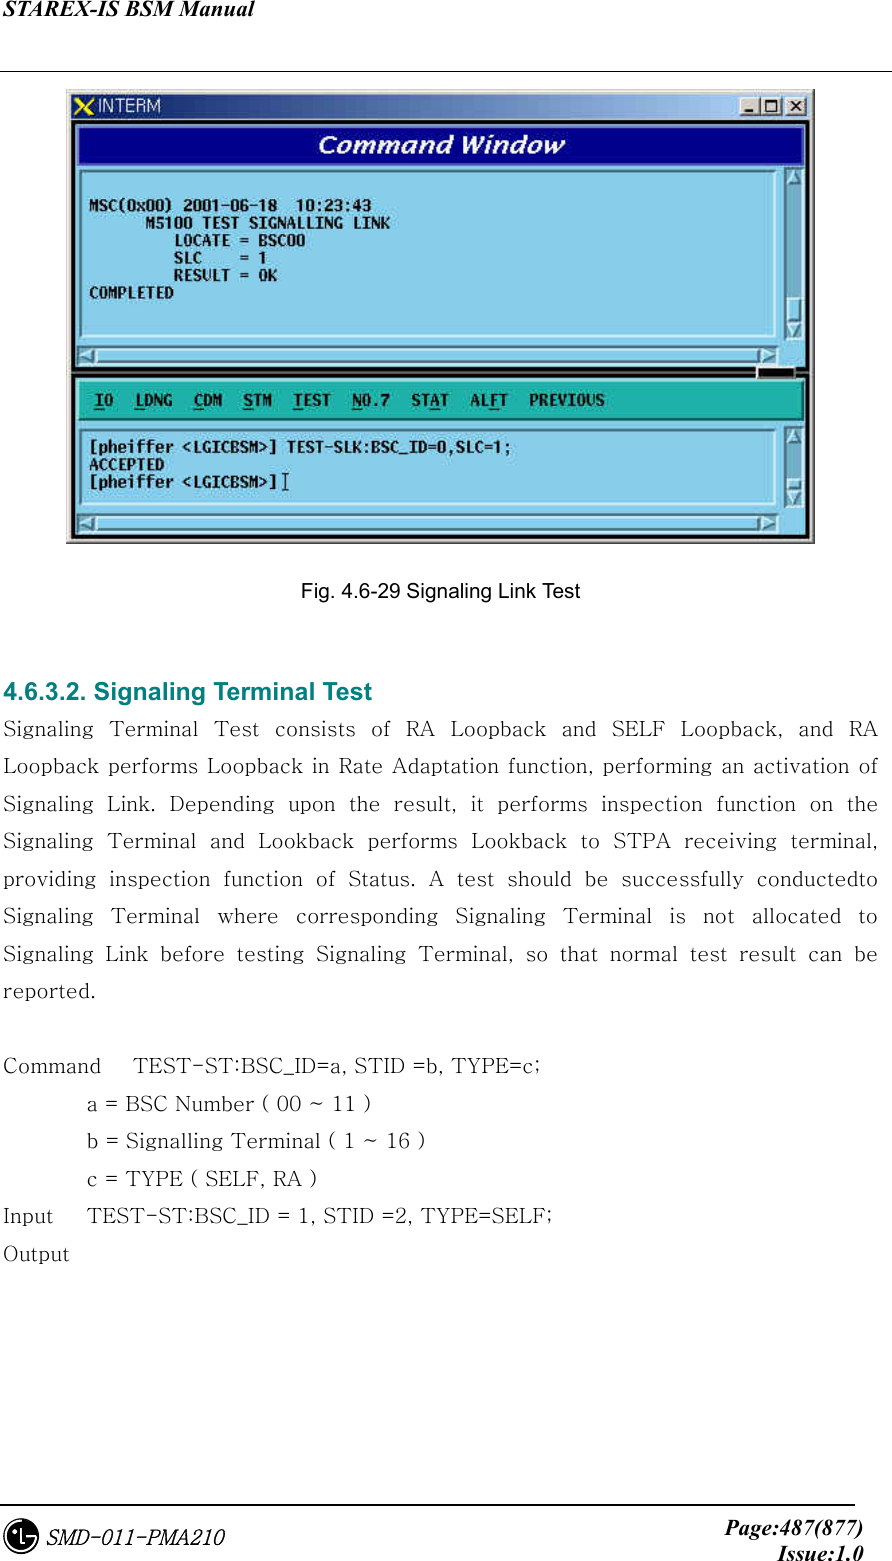 STAREX-IS BSM Manual     Page:487(877)Issue:1.0SMD-011-PMA210  Fig. 4.6-29 Signaling Link Test  4.6.3.2. Signaling Terminal Test Signaling  Terminal  Test  consists  of  RA  Loopback  and  SELF  Loopback,  and  RA Loopback performs Loopback in Rate Adaptation function, performing an activation of Signaling  Link.  Depending  upon  the  result,  it  performs  inspection  function  on  the Signaling  Terminal  and  Lookback  performs  Lookback  to  STPA  receiving  terminal, providing  inspection  function  of  Status.  A  test  should  be  successfully  conductedto Signaling Terminal where corresponding Signaling Terminal is not  allocated  to Signaling  Link  before  testing  Signaling  Terminal,  so  that  normal  test  result  can  be reported.  Command   TEST-ST:BSC_ID=a, STID =b, TYPE=c;   a = BSC Number ( 00 ~ 11 )   b = Signalling Terminal ( 1 ~ 16 )   c = TYPE ( SELF, RA ) Input    TEST-ST:BSC_ID = 1, STID =2, TYPE=SELF; Output 